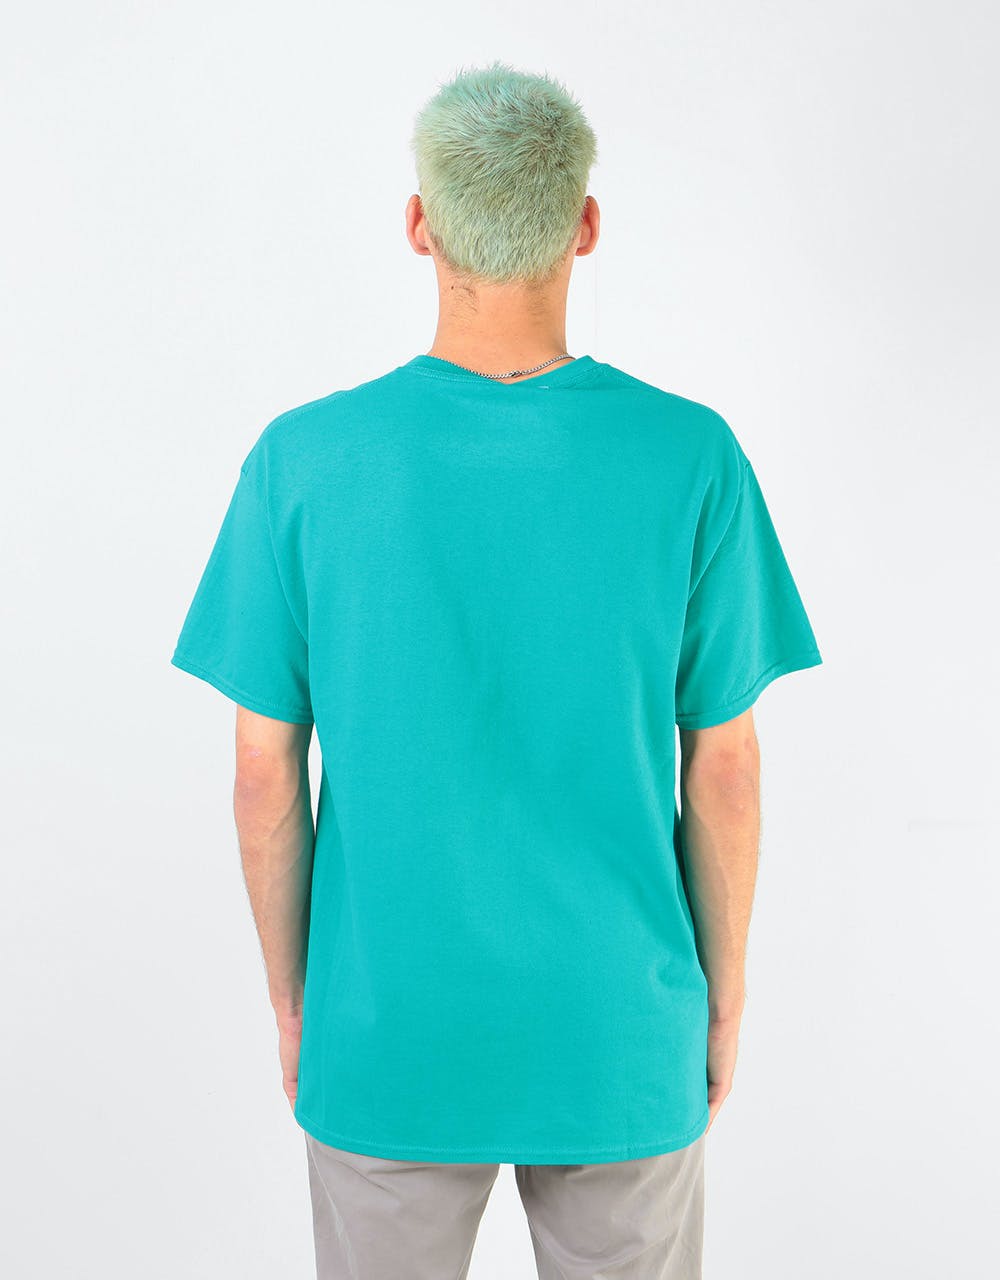 Route One Countenance T-Shirt - Jade Dome